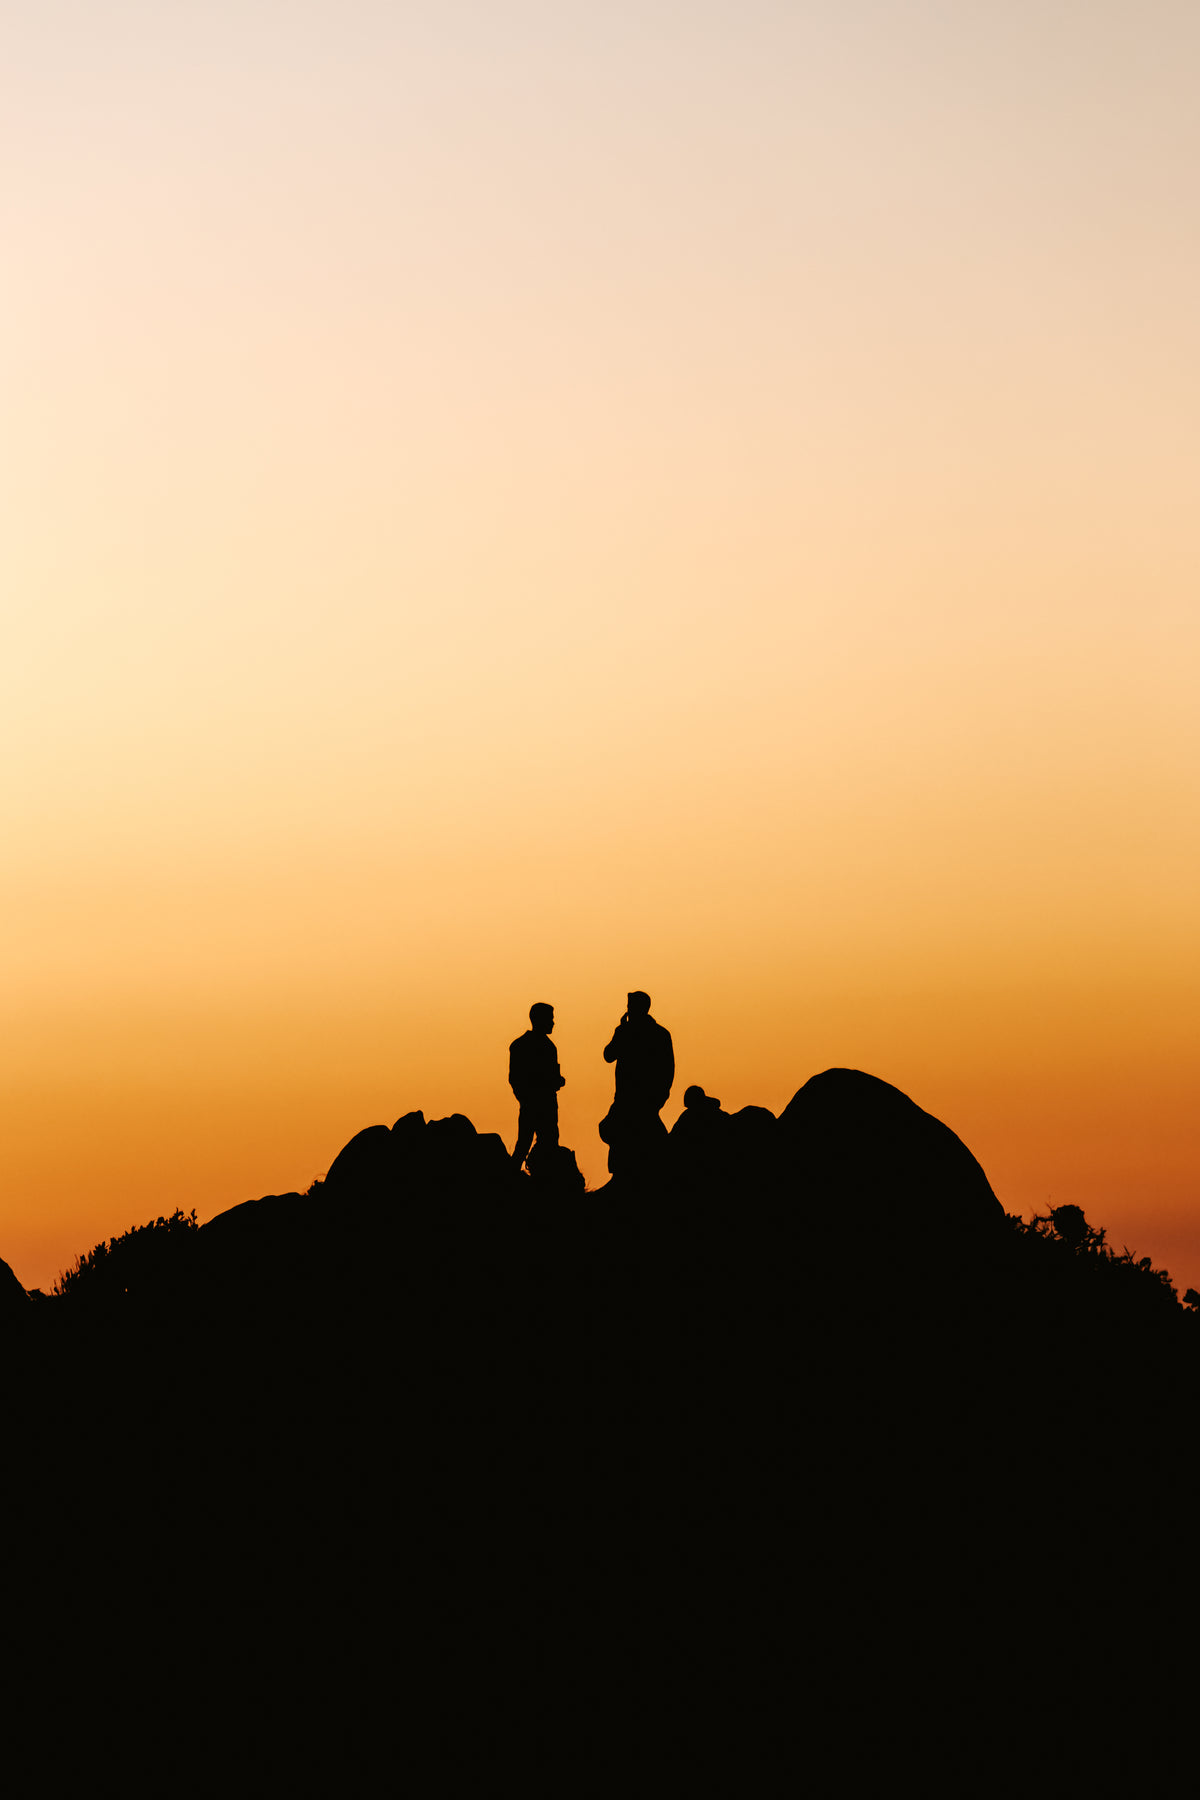 two people stands on a hill silhouetted by the sunset